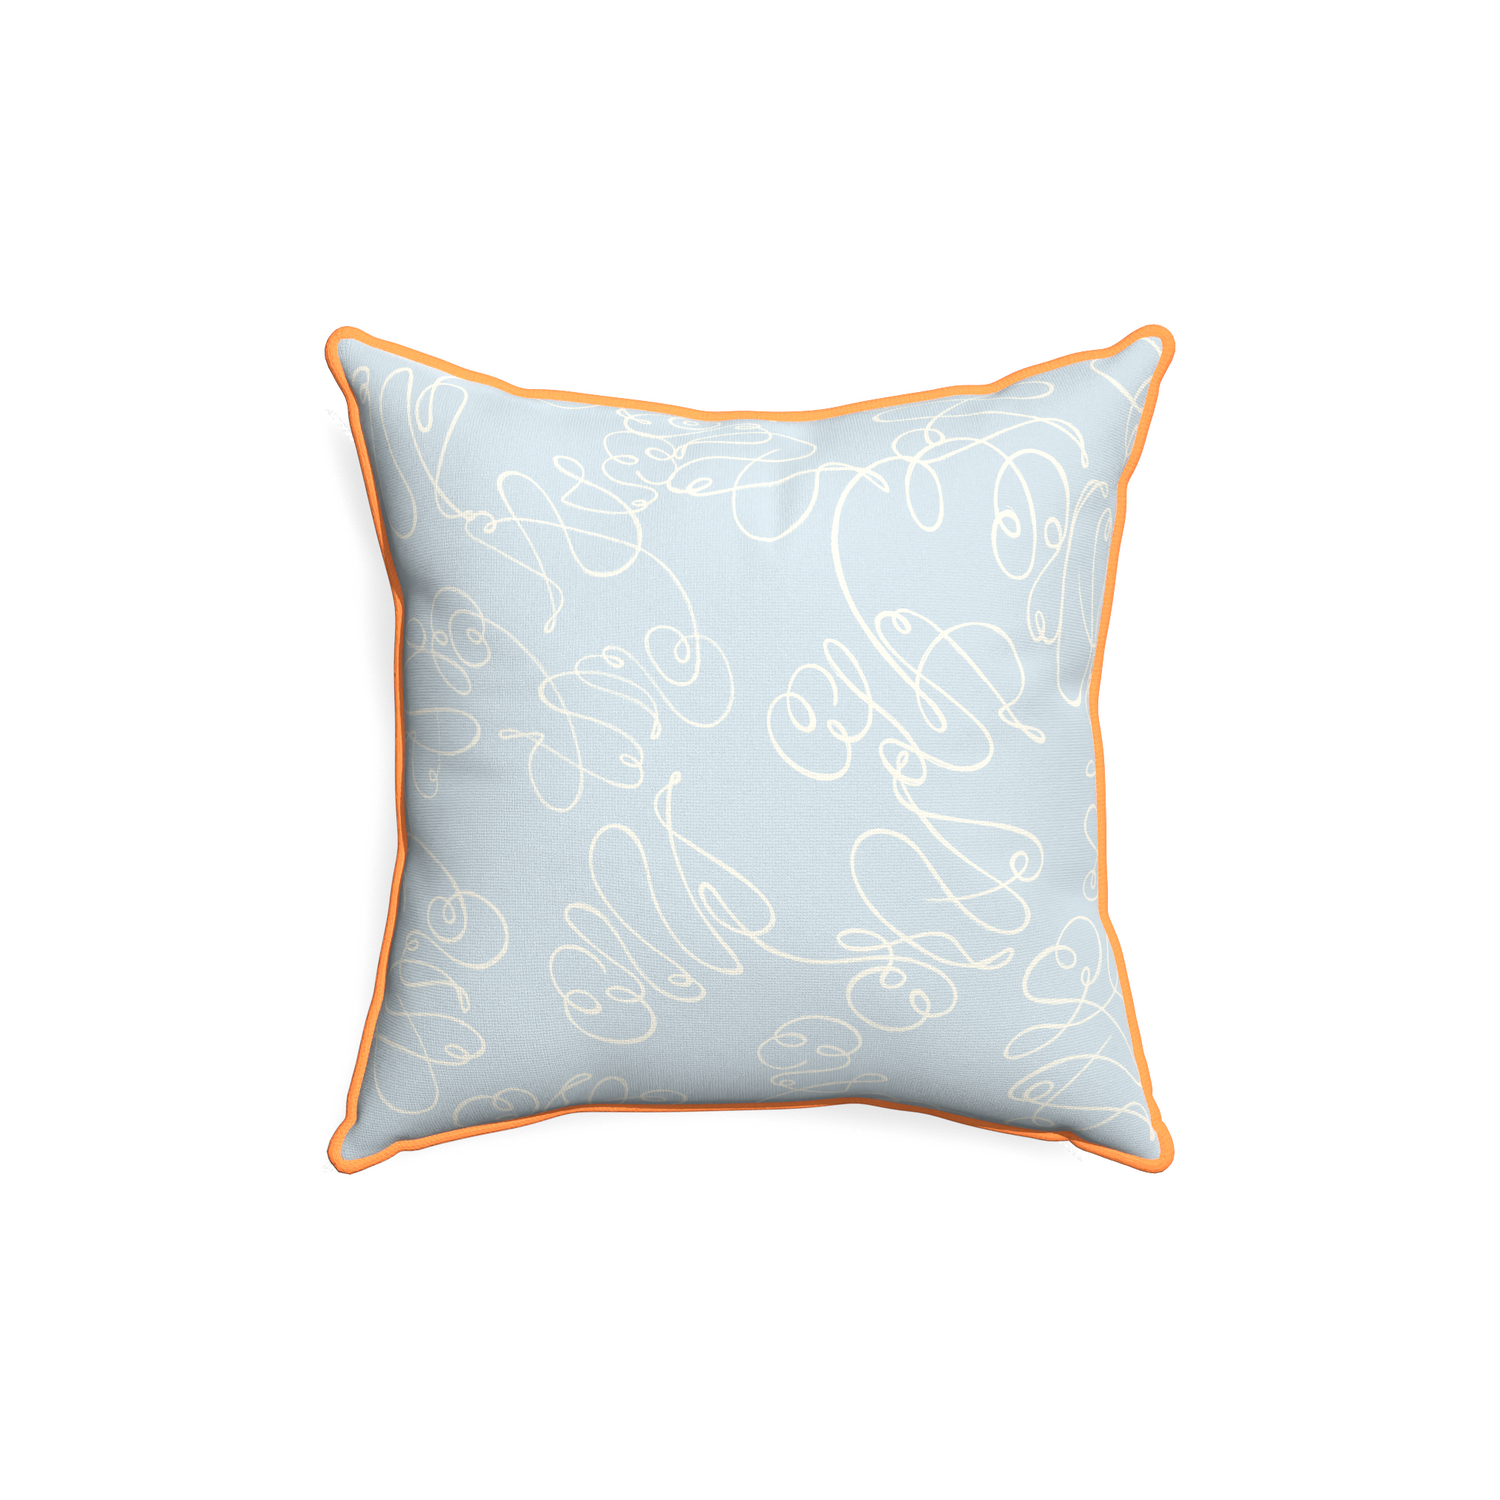 18-square mirabella custom pillow with clementine piping on white background